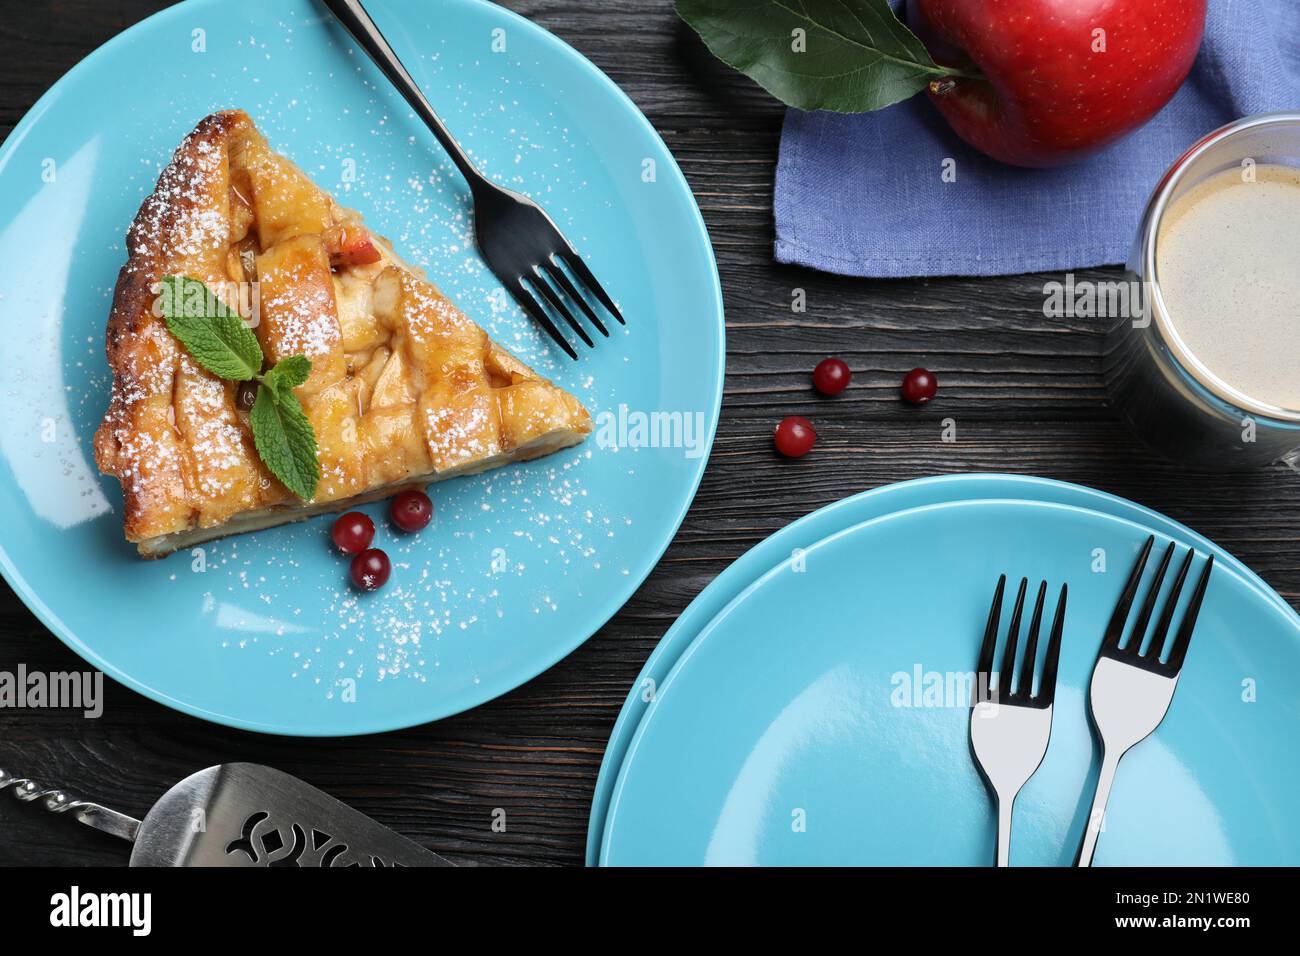 Slice of traditional apple pie served on black wooden table, flat lay Stock Photo